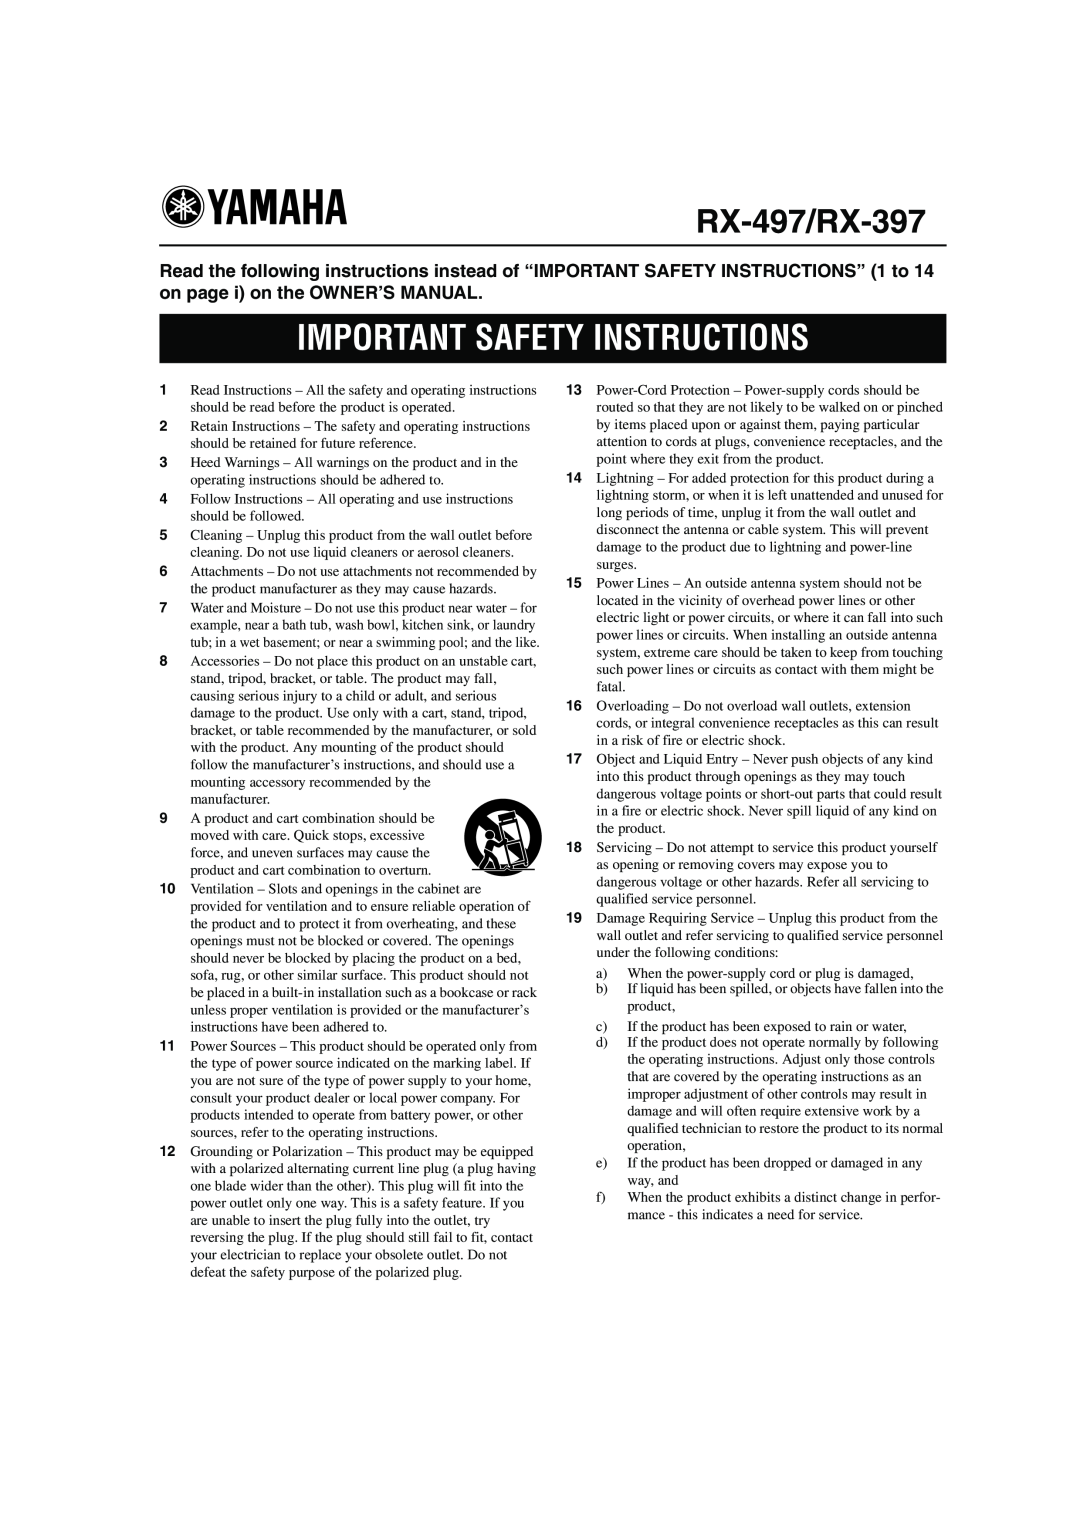 Yamaha owner manual Important Safety Instructions, RX-497/RX-397 